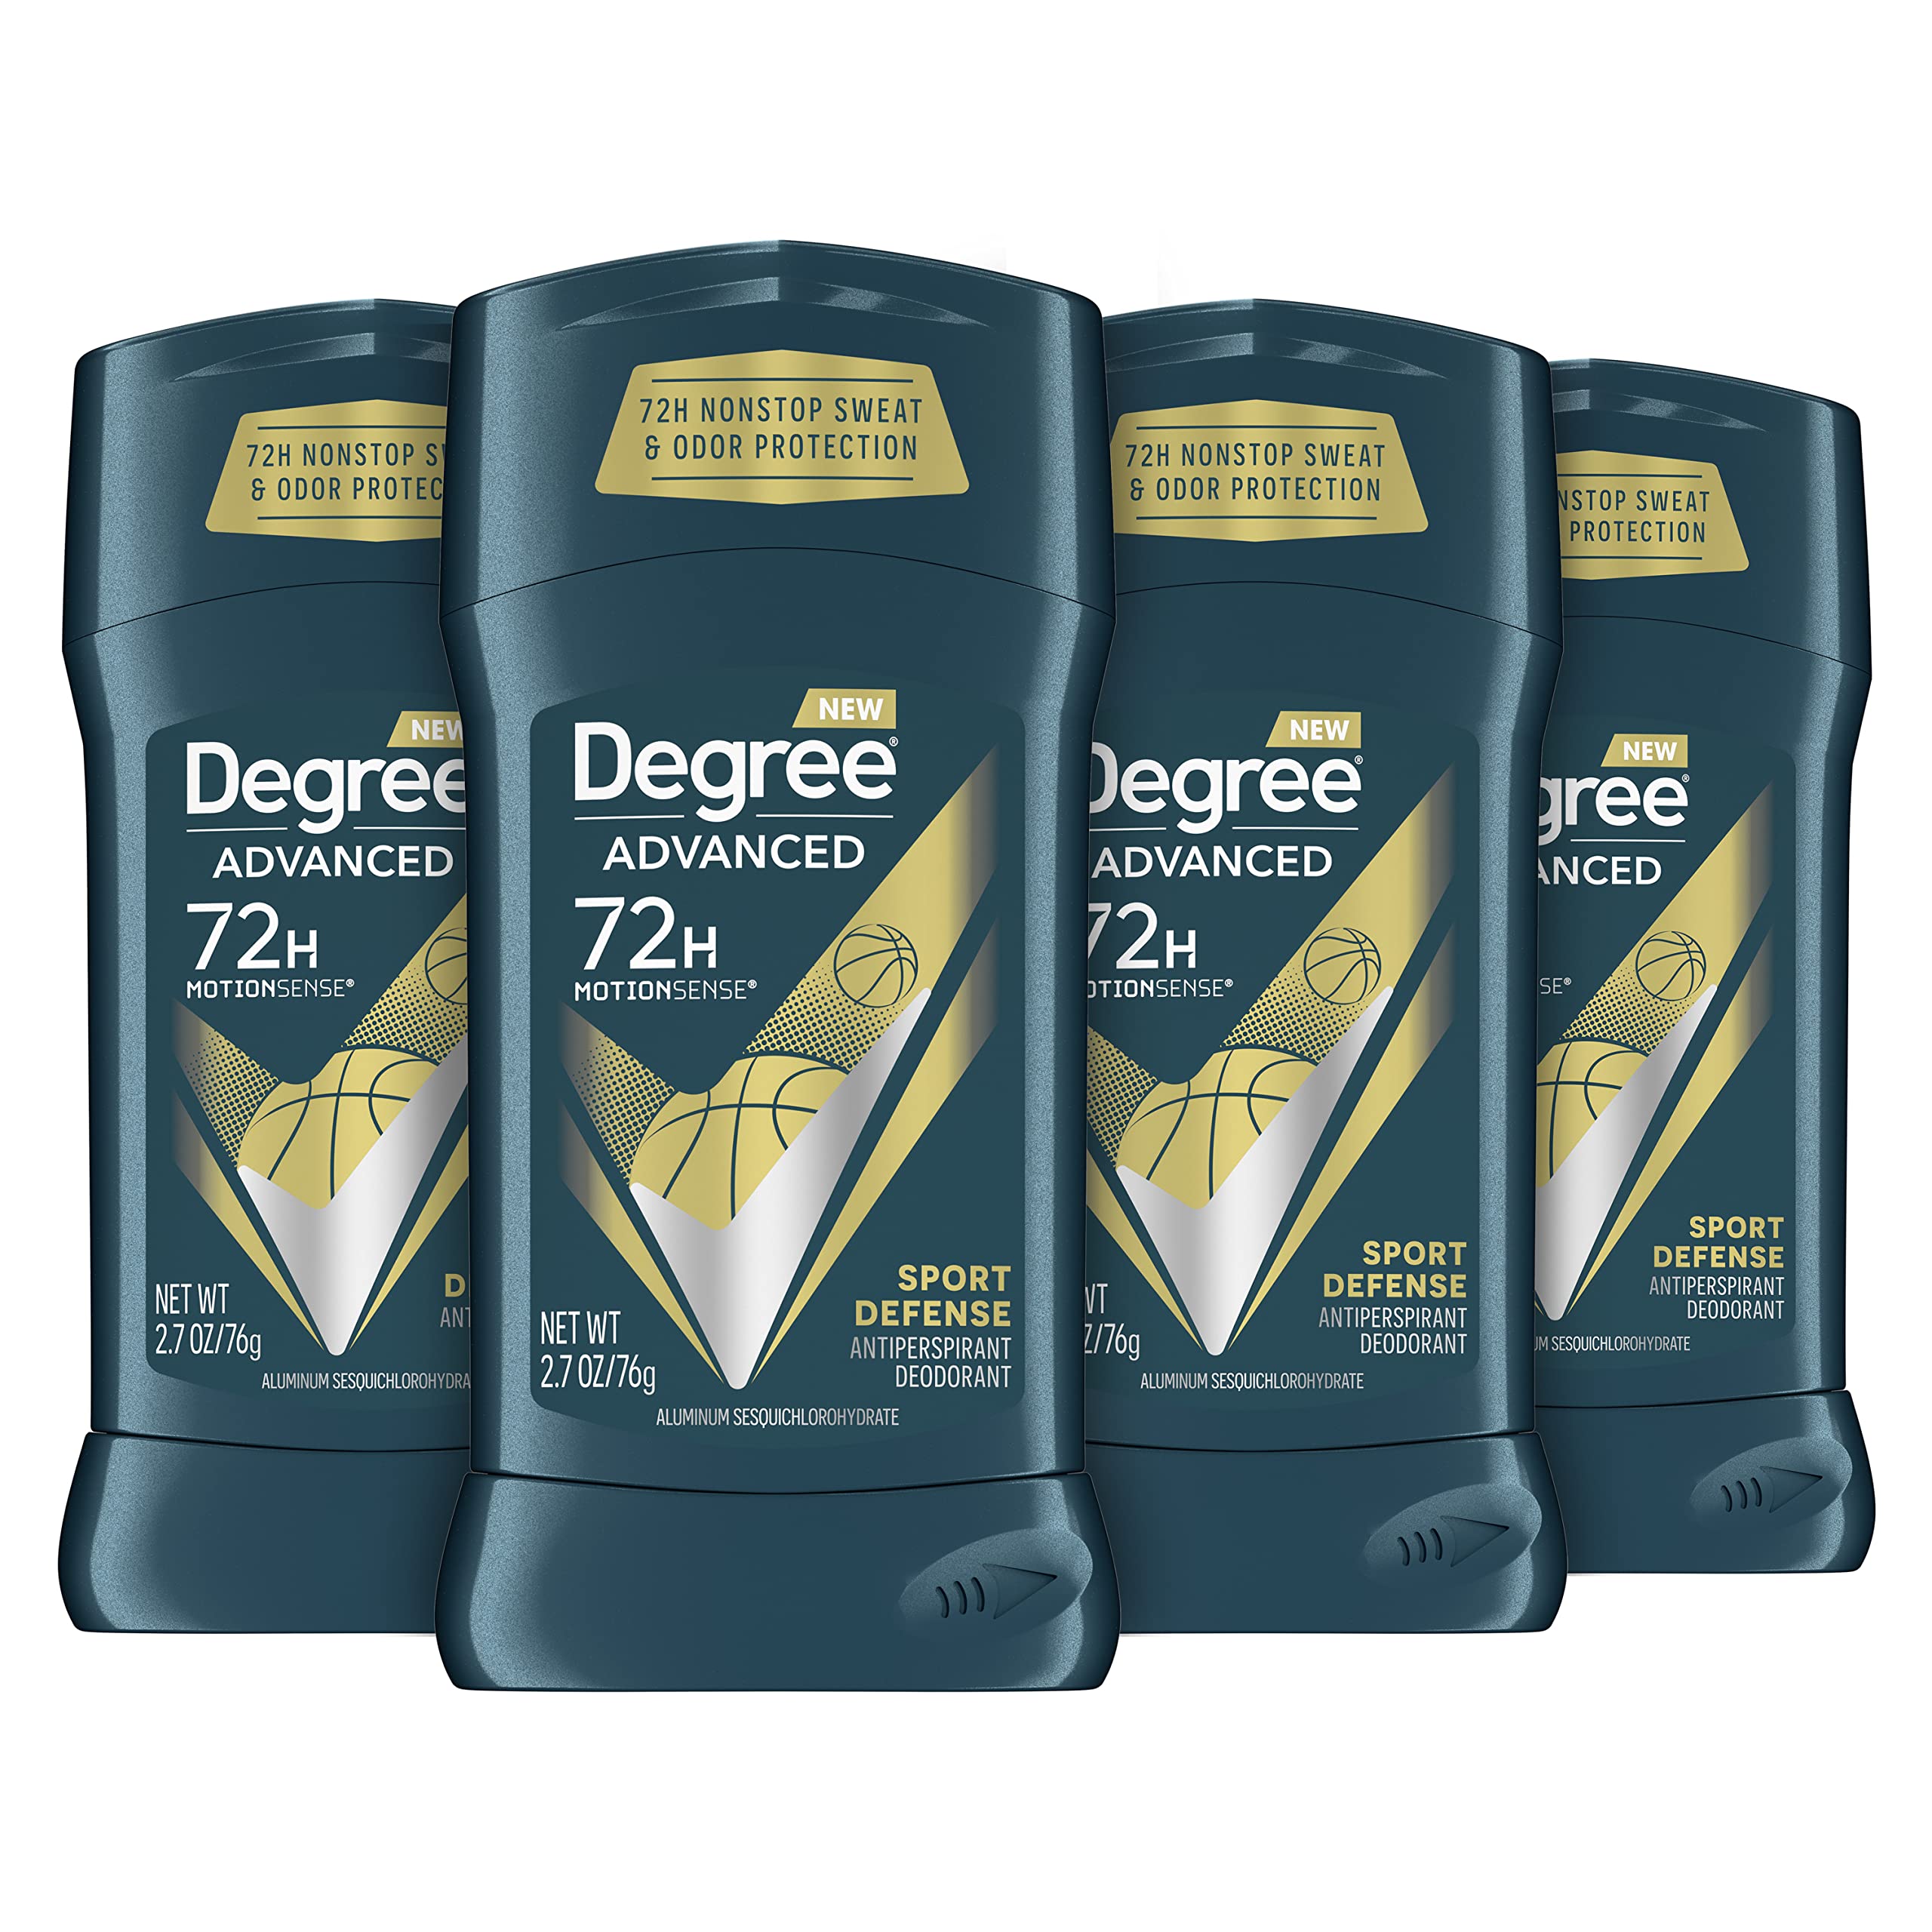 Degree Advanced Protection Antiperspirant Deodorant Sport Defense 4 count 72-Hour Sweat and Odor Protection Antiperspirant For Men With MotionSense Technology 2.7 oz